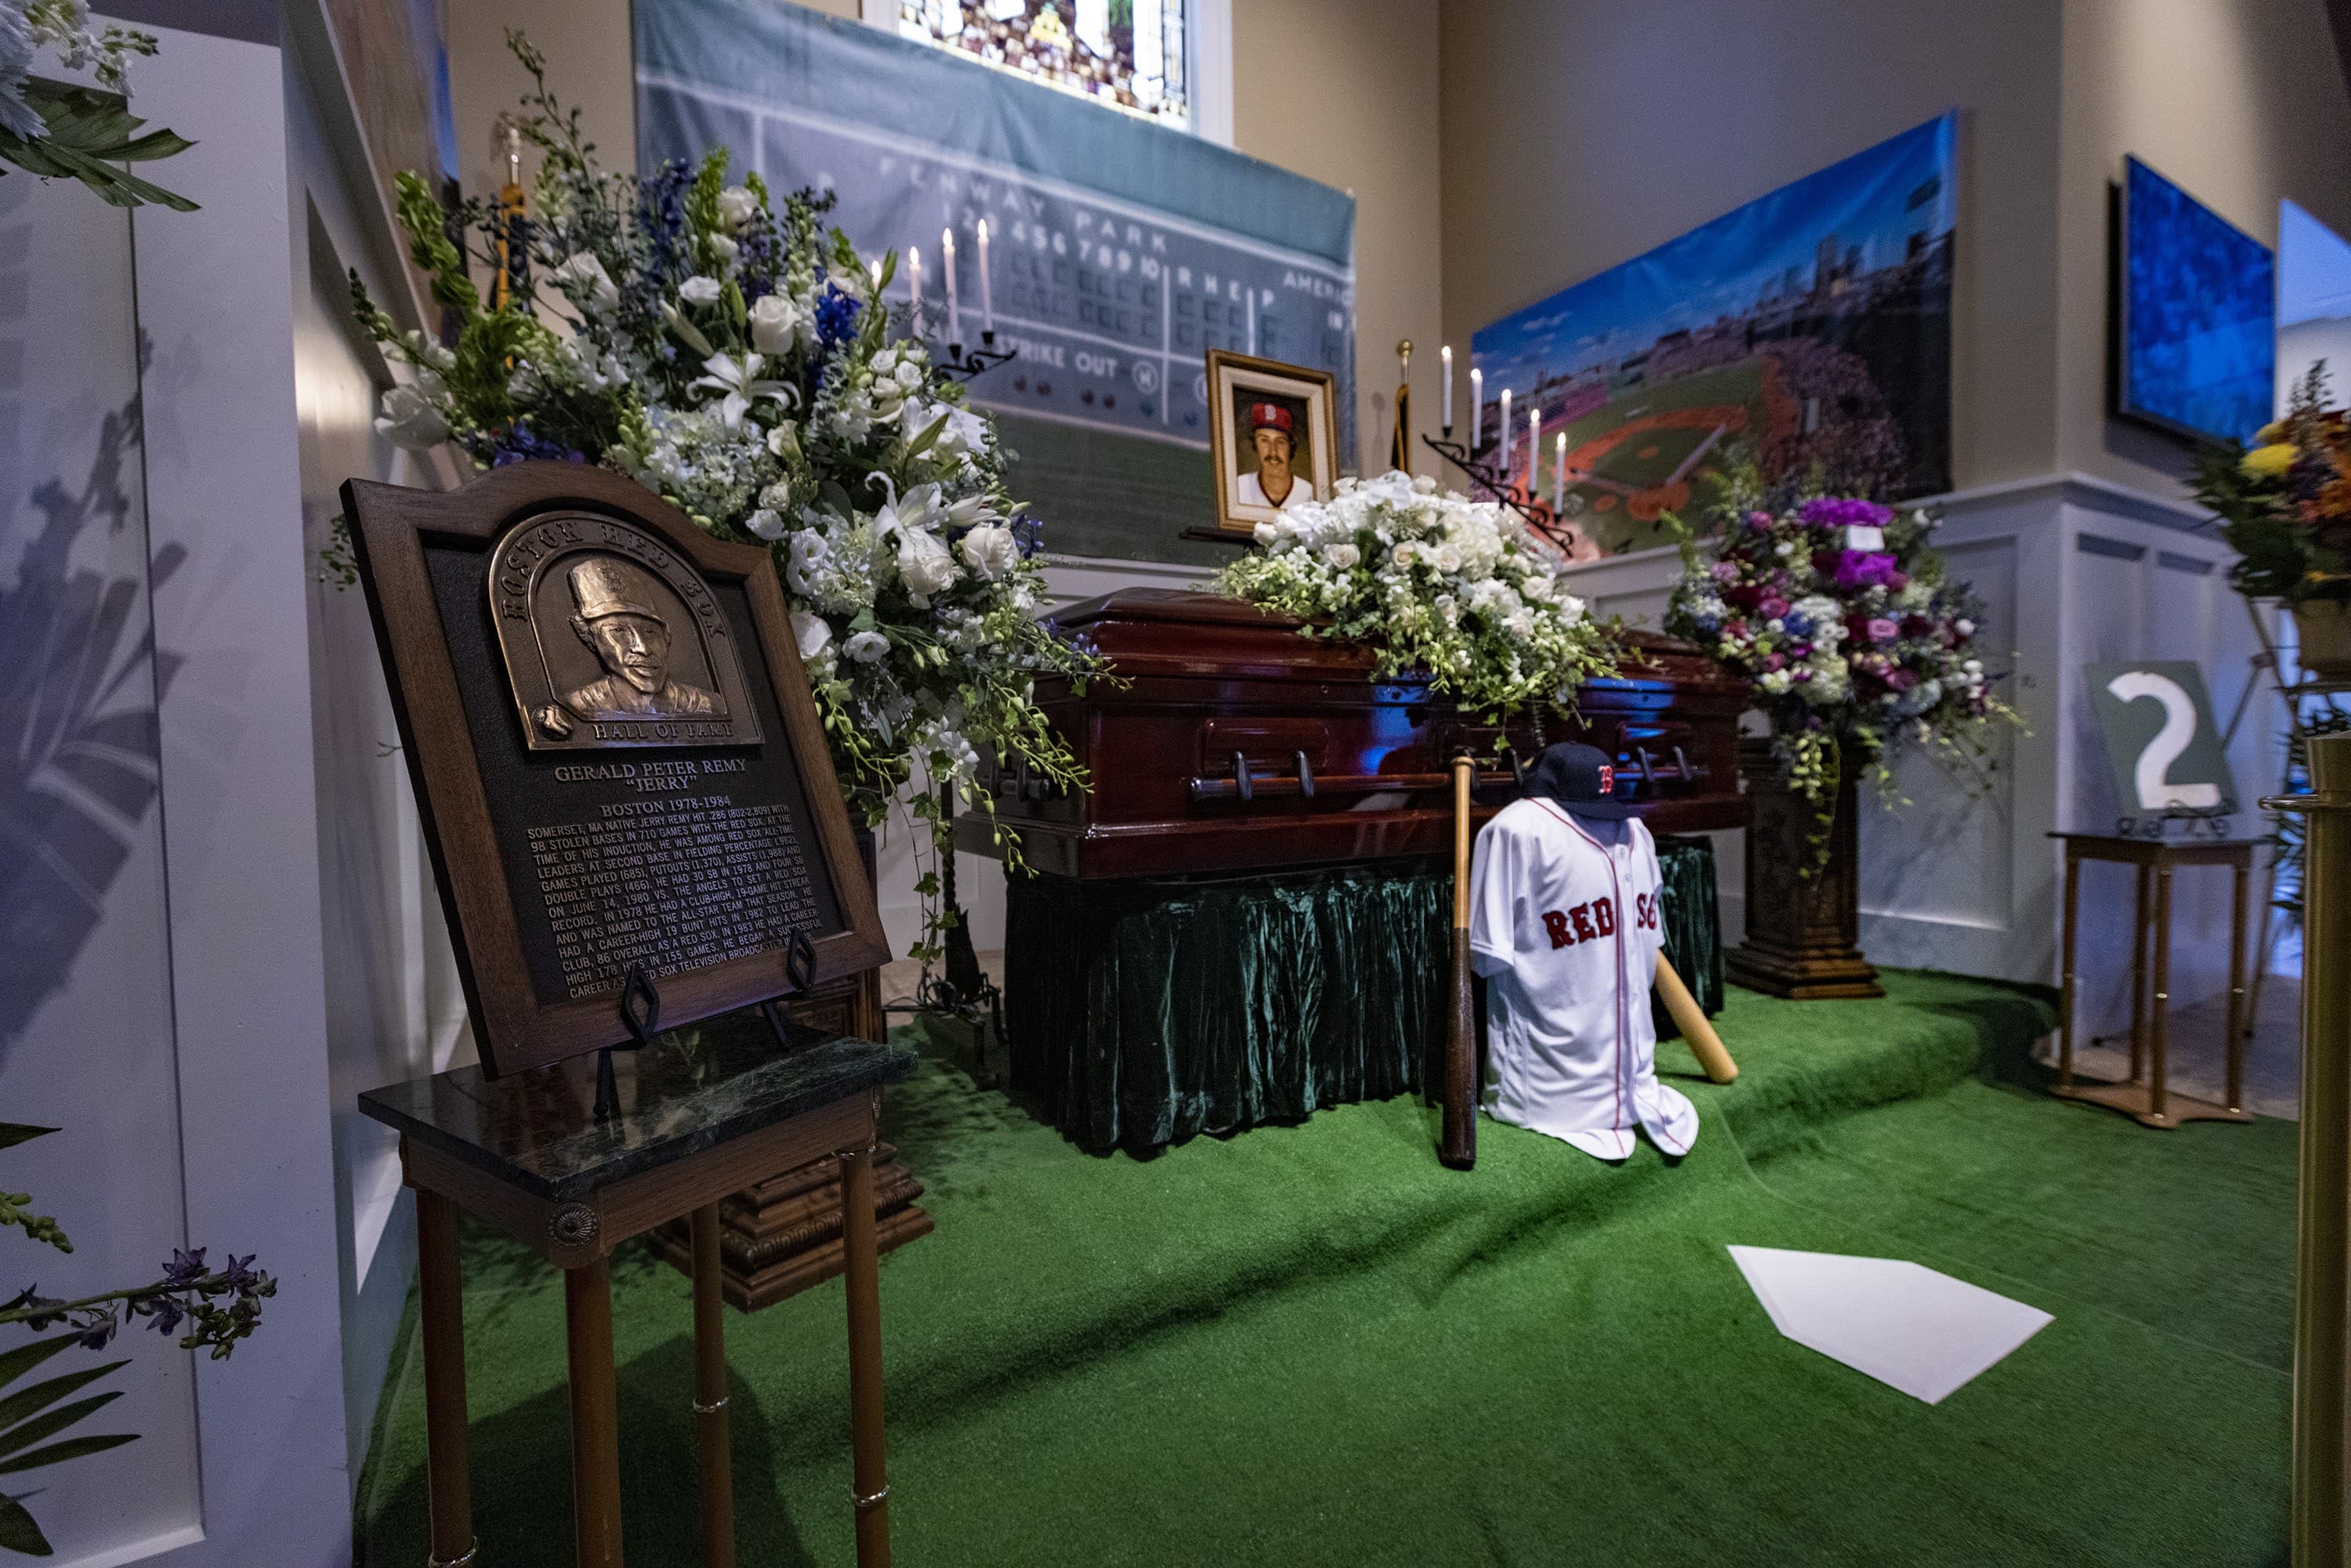 Mourners, fans pay their respects to Jerry Remy, a Red Sox Hall of Famer  and broadcaster